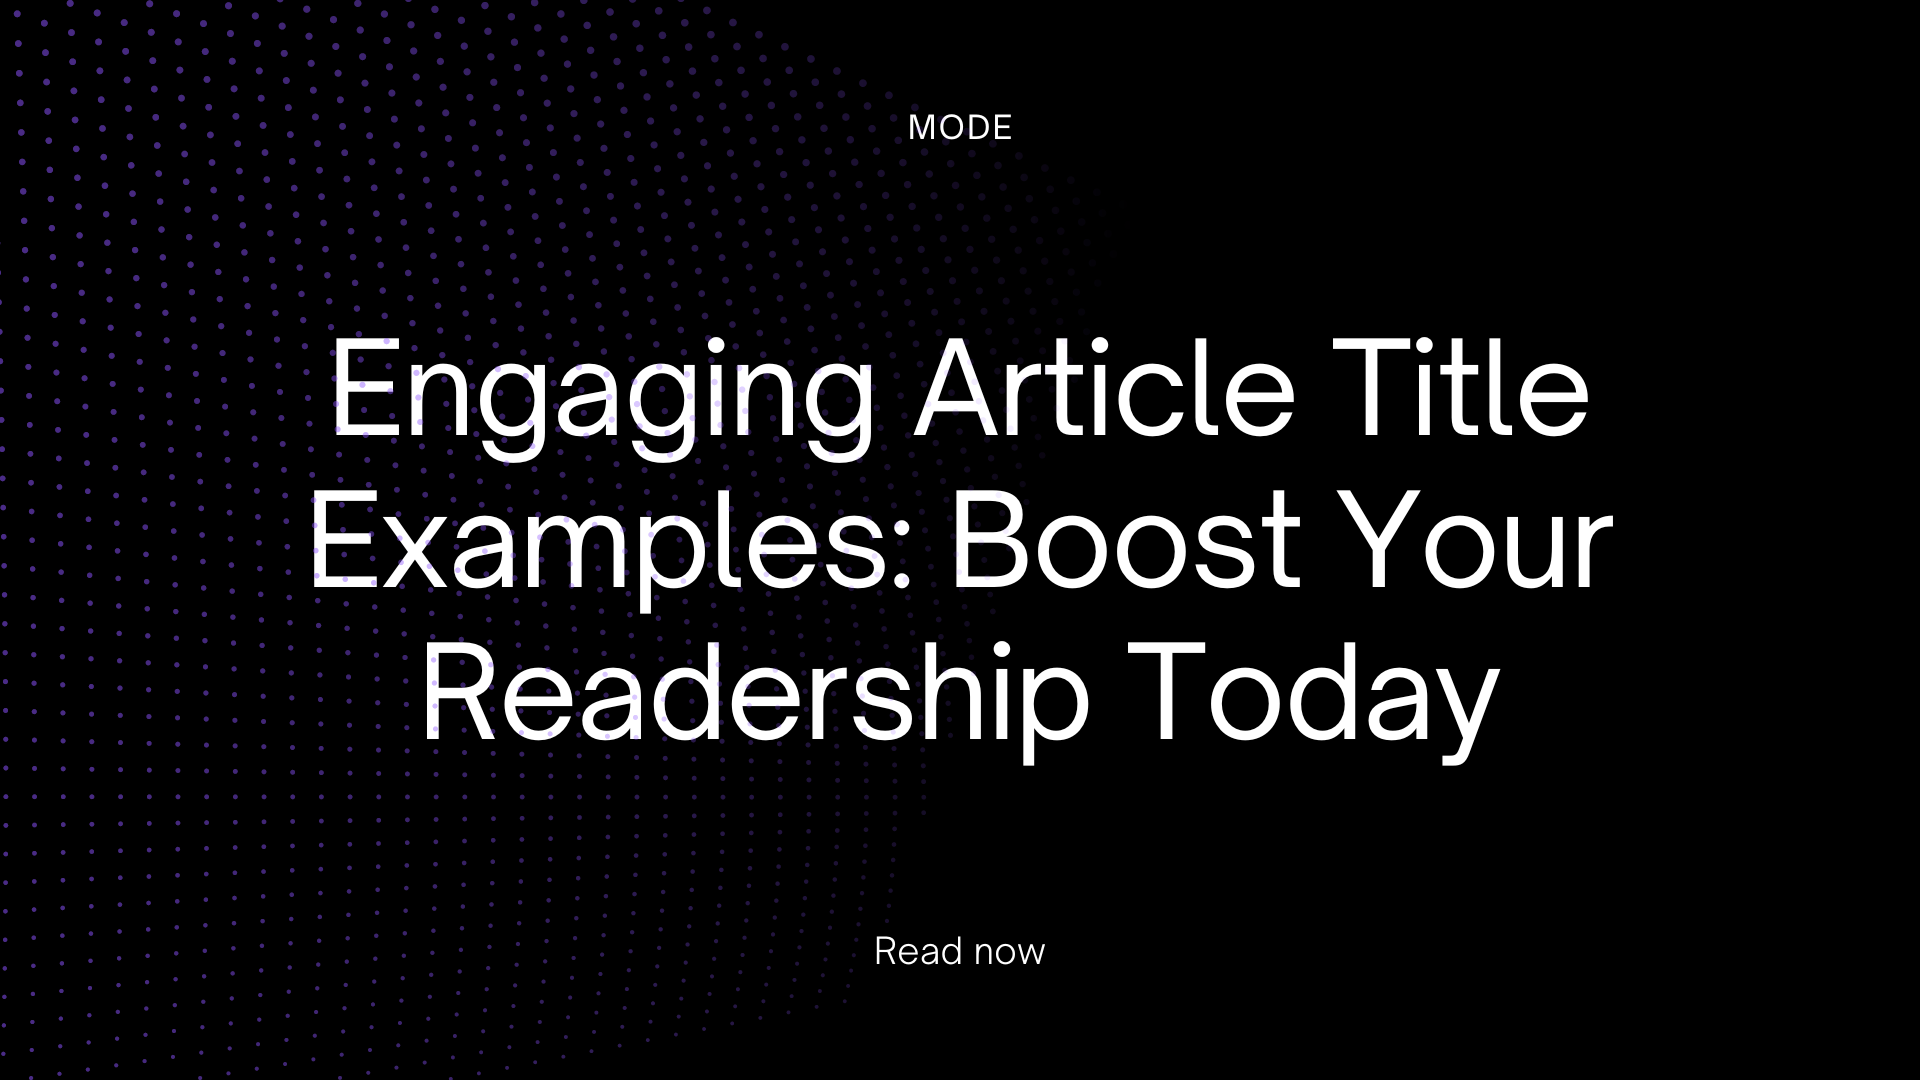 Engaging Article Title Examples: Boost Your Readership Today